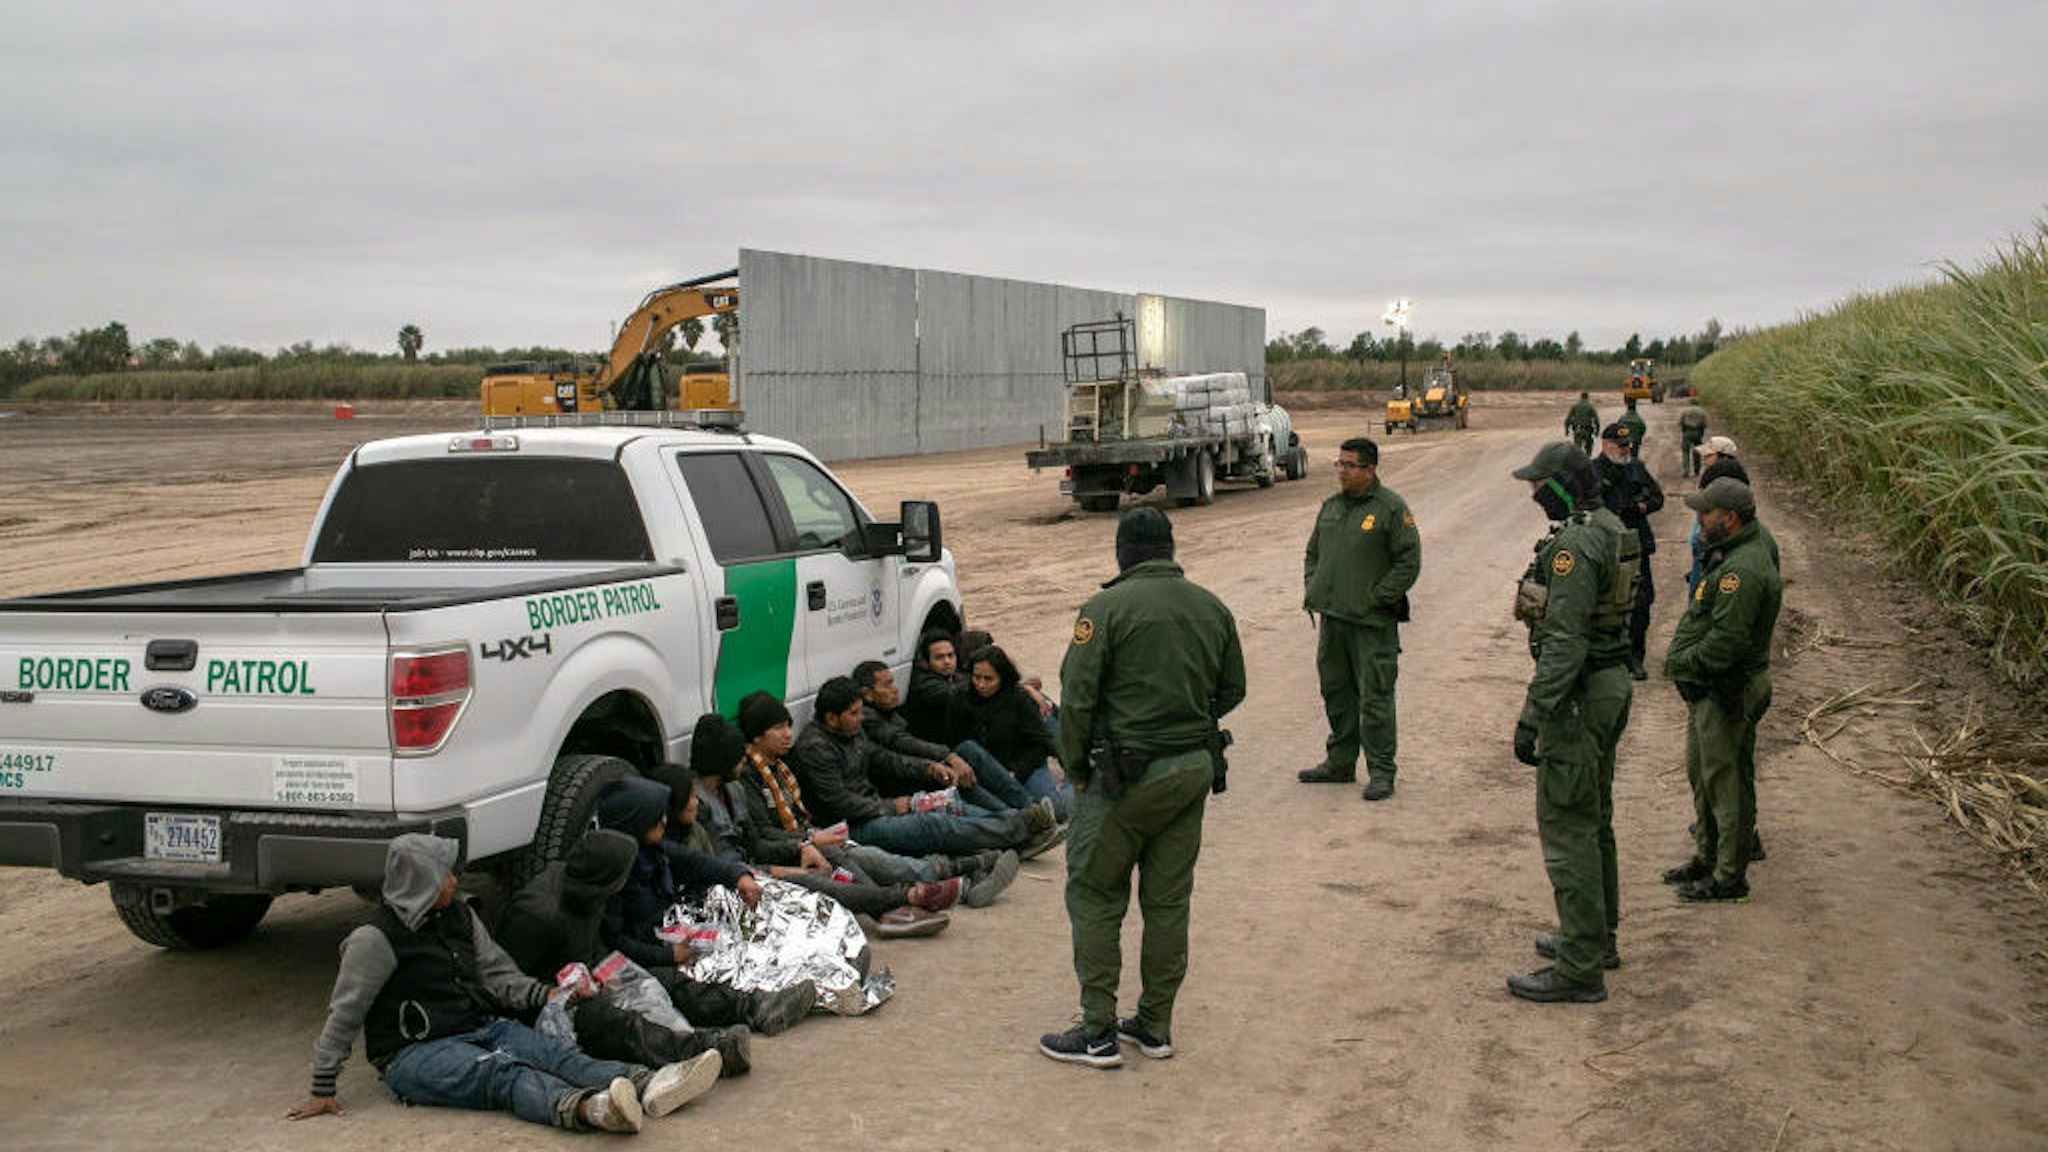 U.S. Border Patrol agents detain undocumented immigrants caught near a section of privately-built border wall under construction on December 11, 2019 near Mission, Texas. The hardline immigration group We Build The Wall is funding construction of the wall on private land along the Rio Grande, which forms the border with Mexico. The group, led by former Trump strategist Stephen Bannon claims to have raised tens of millions of dollars in a GoFundMe drive to build sections of wall along stretches of the U.S. southwest border with Mexico. (Photo by John Moore/Getty Images)